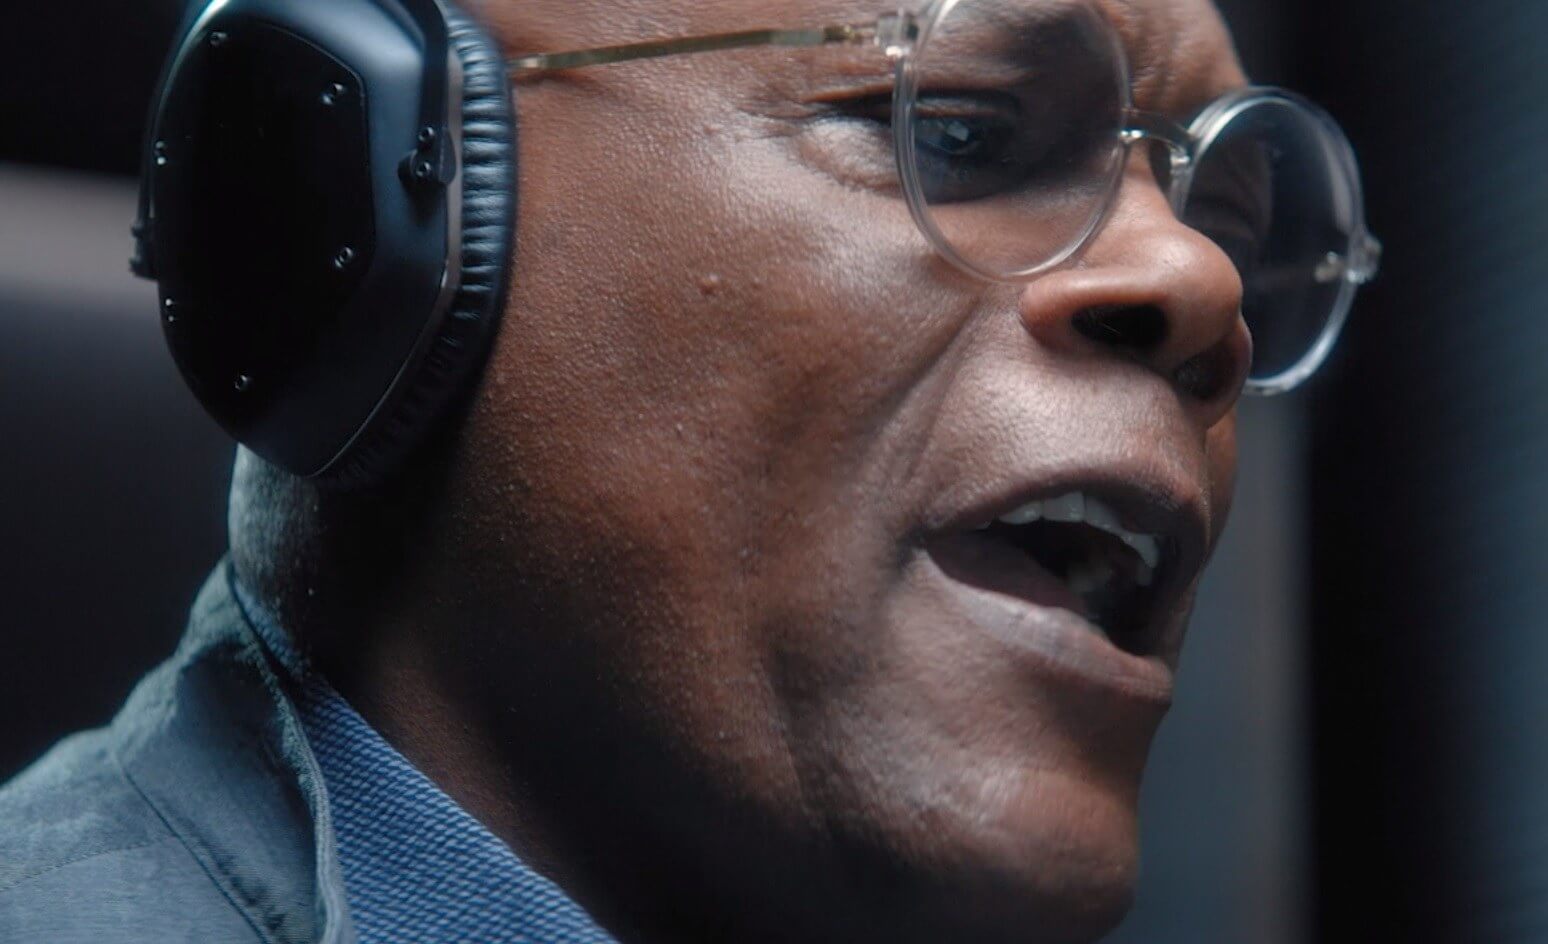 Samuel L. Jackson's voice is now available on Alexa devices